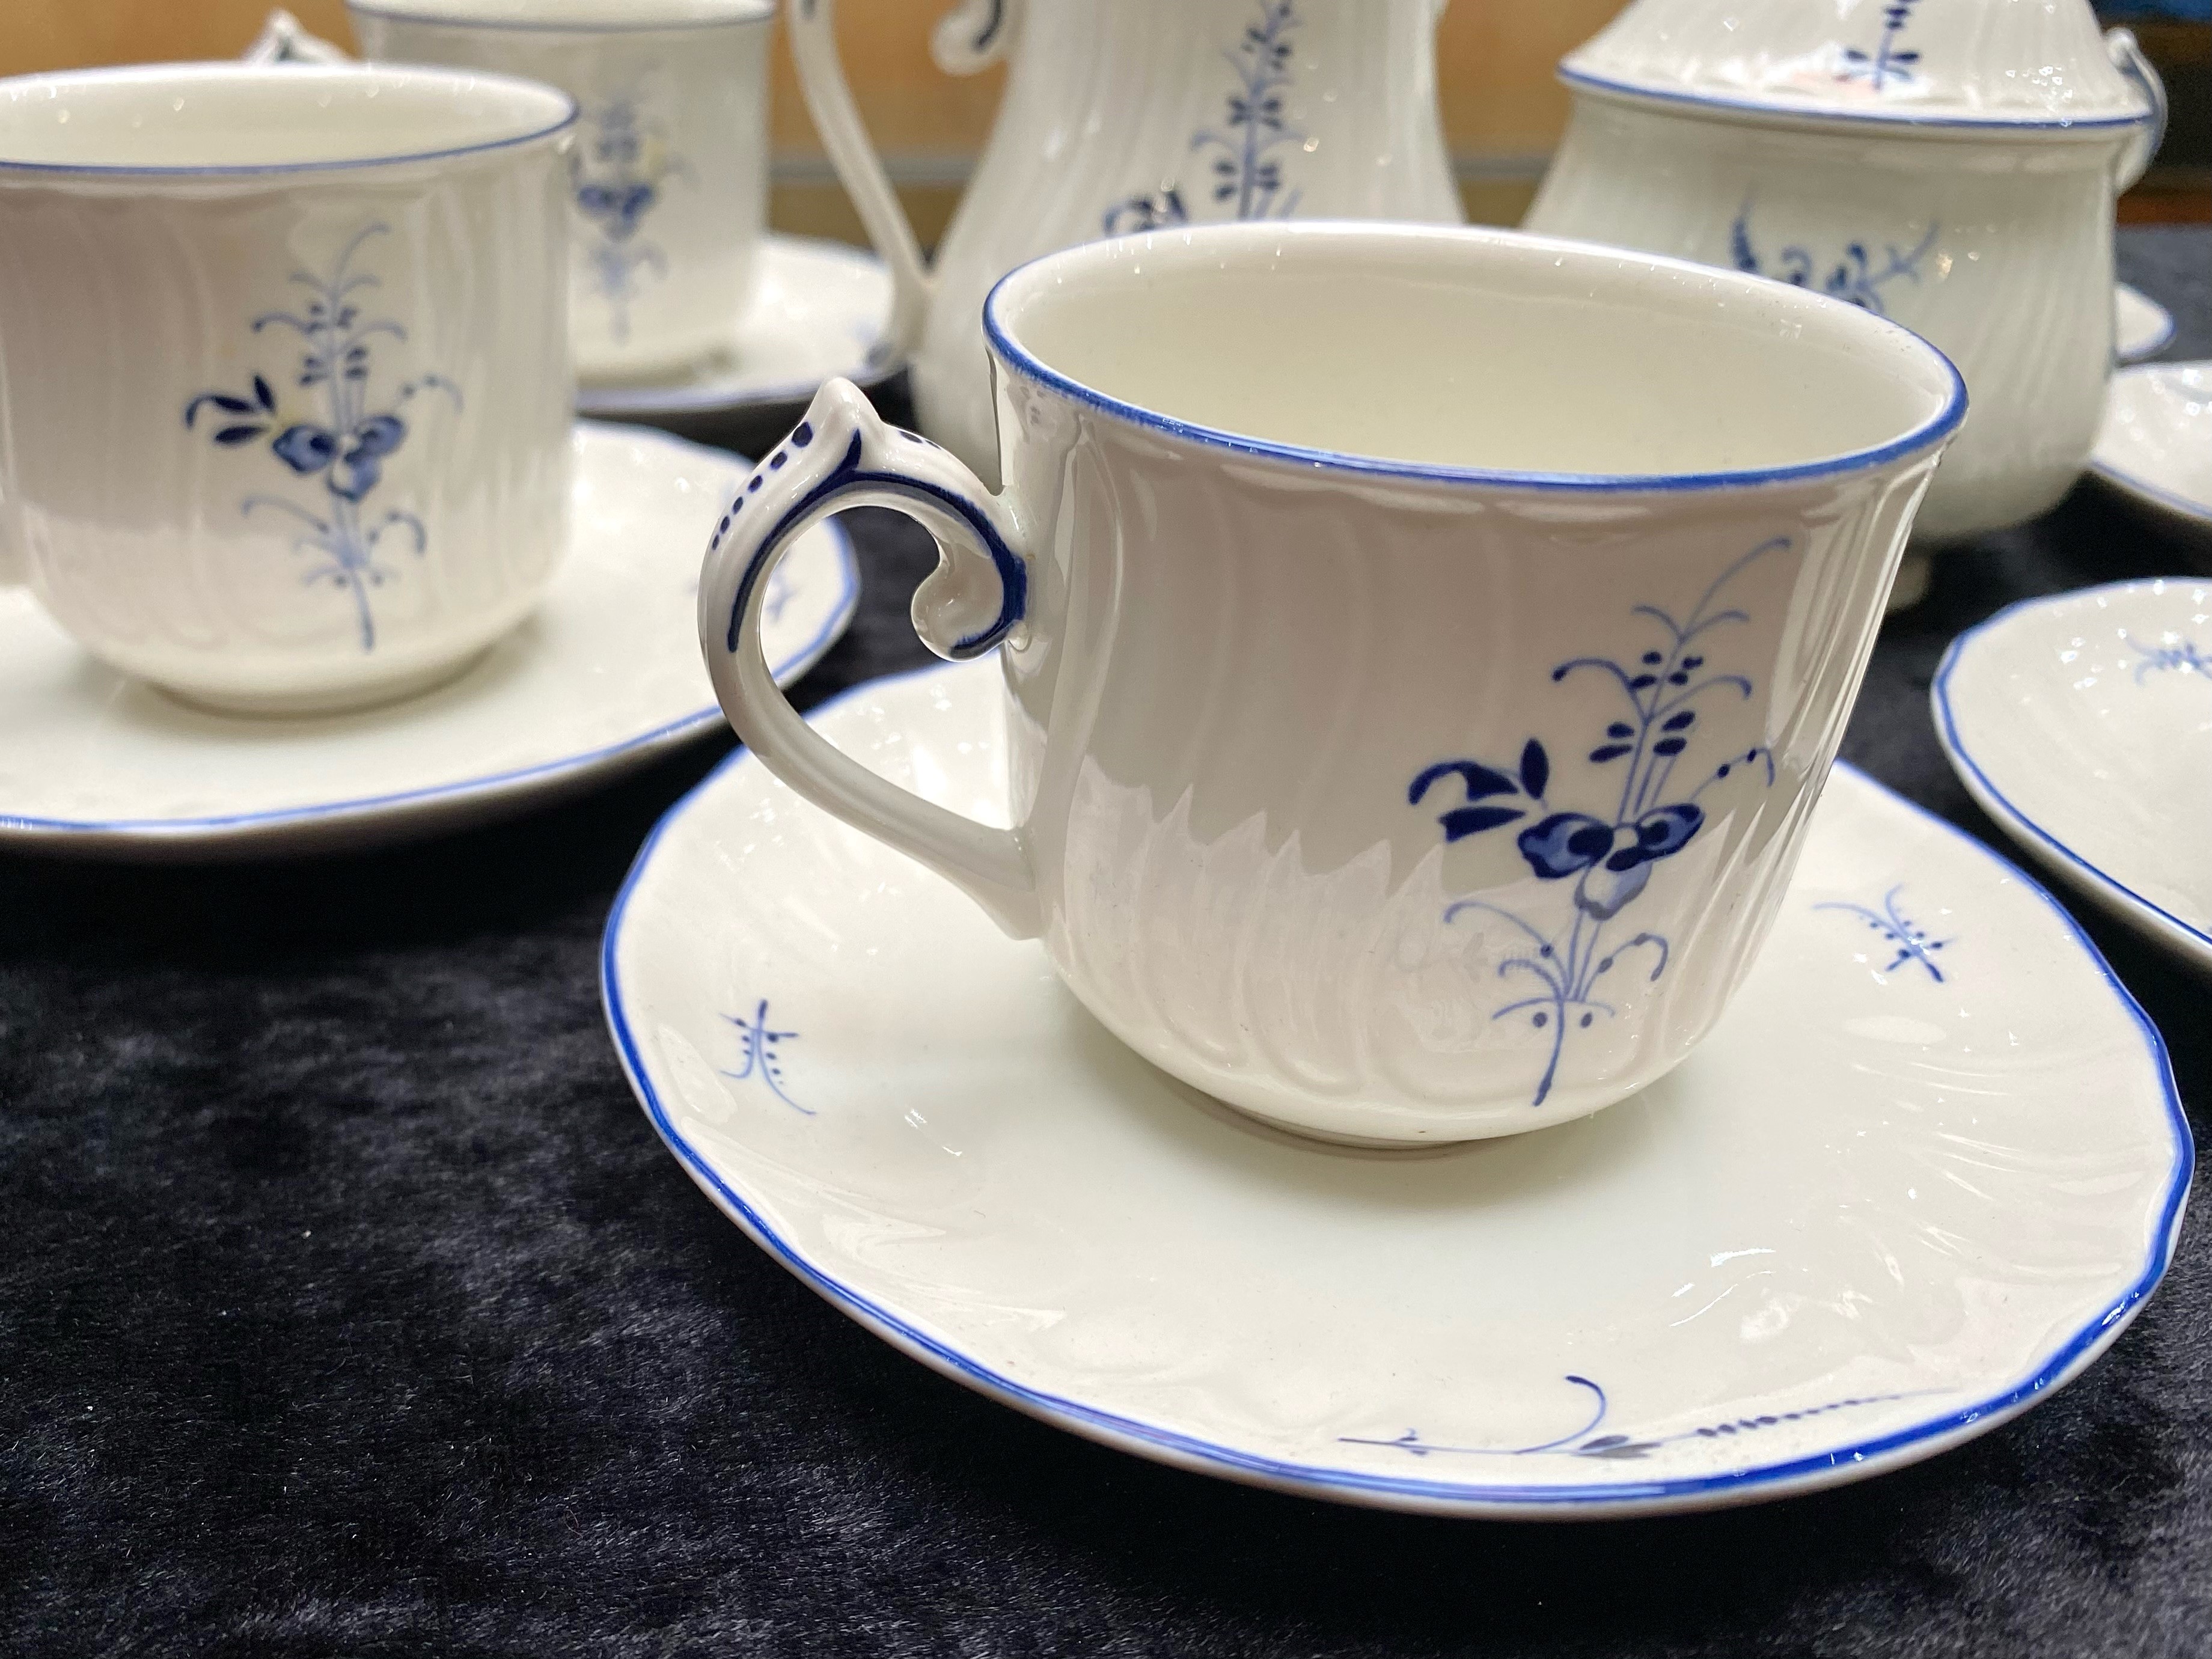 Villeroy & Boch Blue and White Teaset comprising 6 cups and saucers, milk jug and sugar bowl. - Image 2 of 2